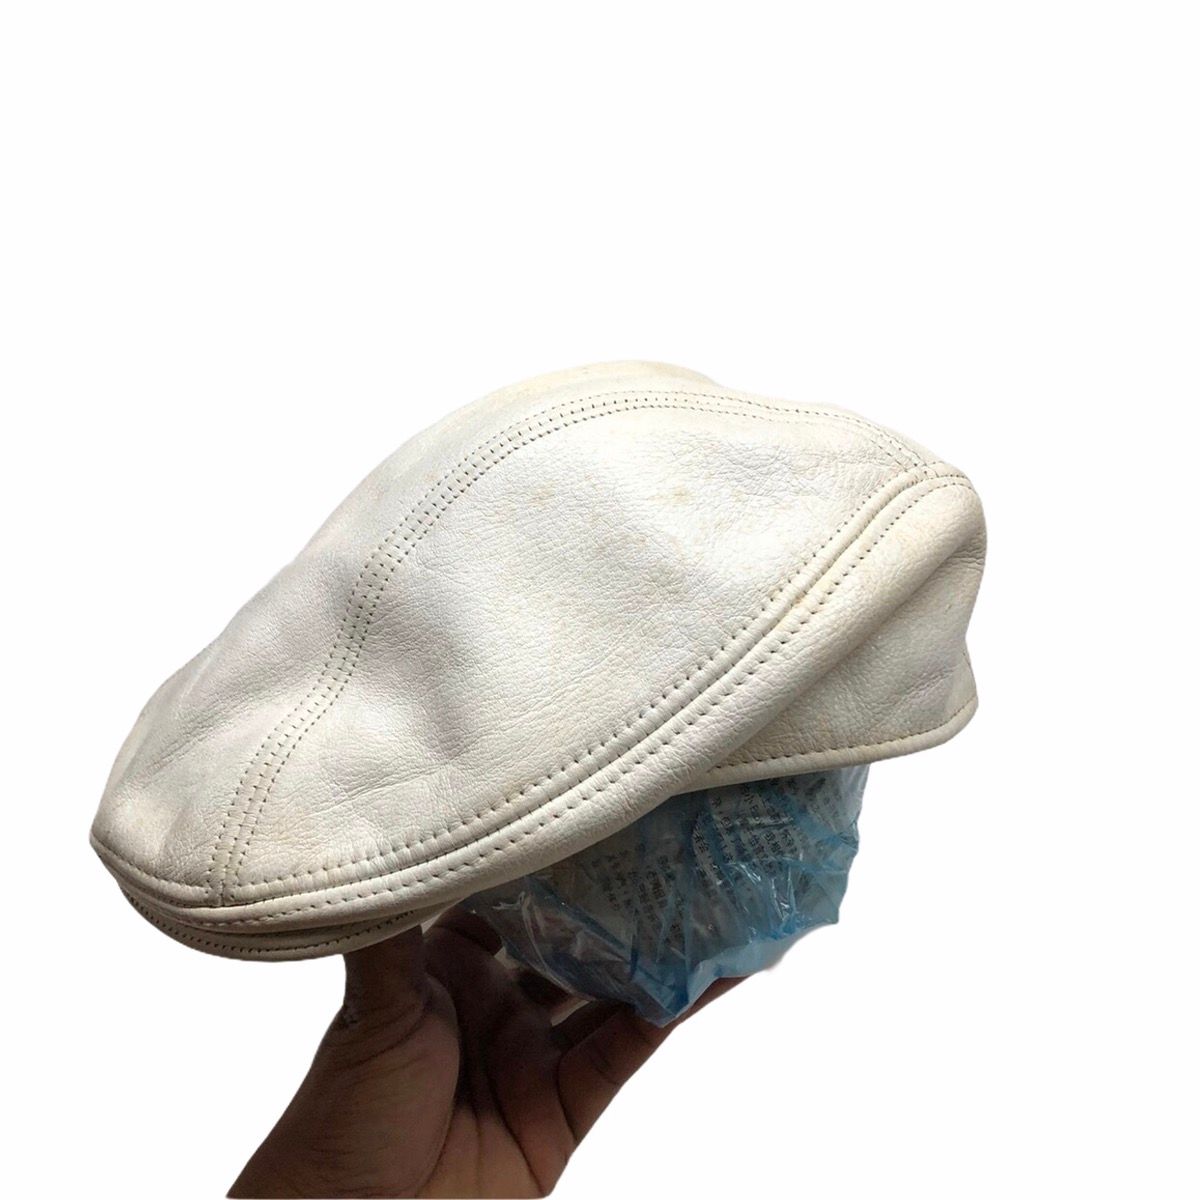 Vintage New York Hat Co. Beret Hat, White Leather Hats Caps Size ONE SIZE - 2 Preview